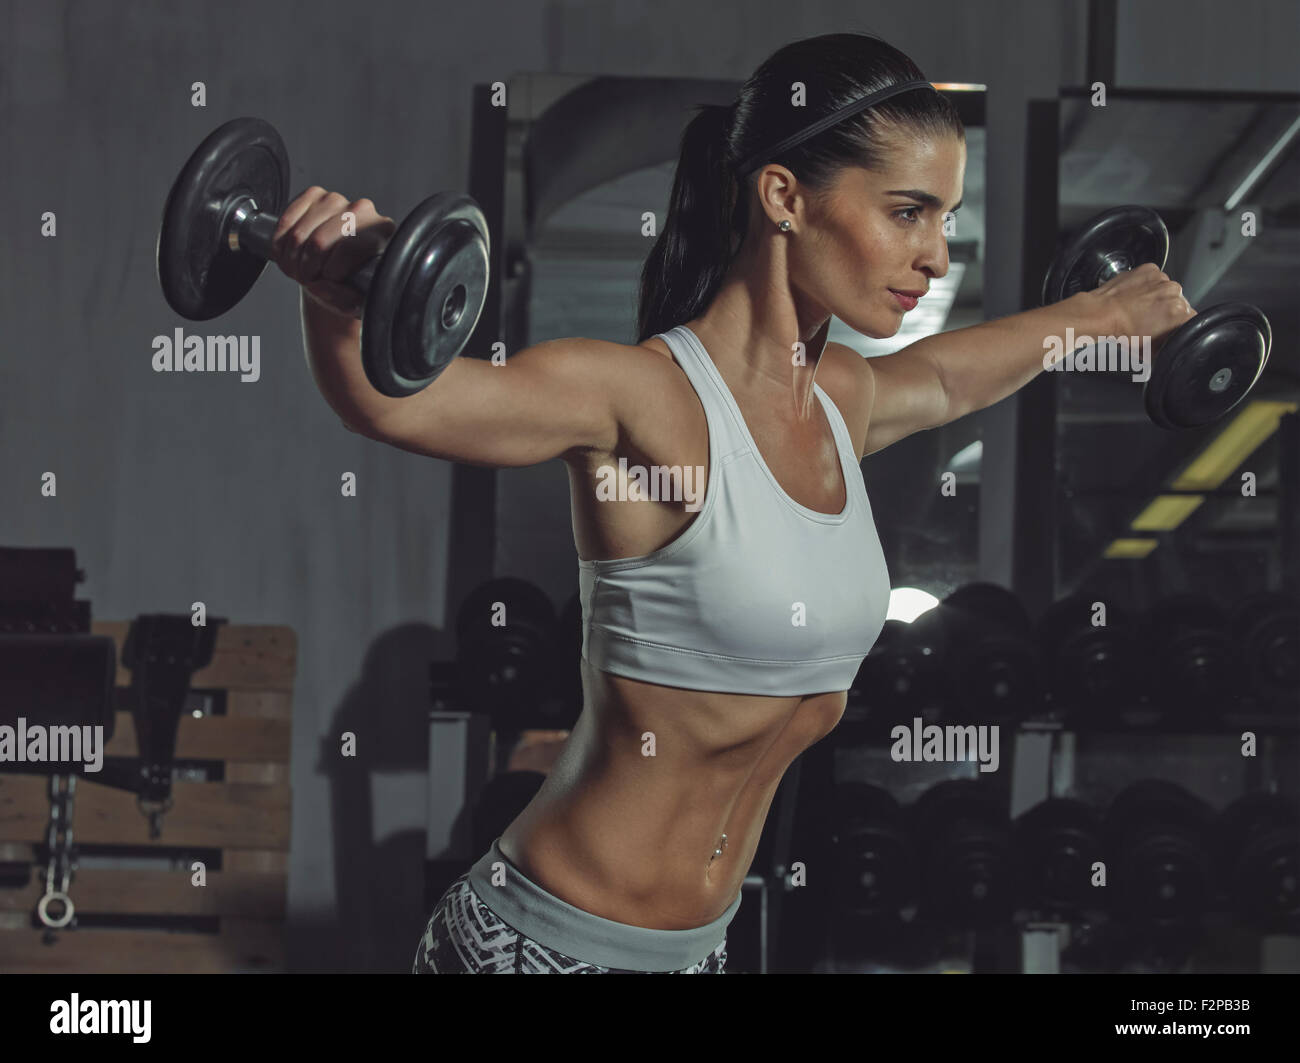 Portrait of a female athlete training with dumbbells in gym Stock Photo